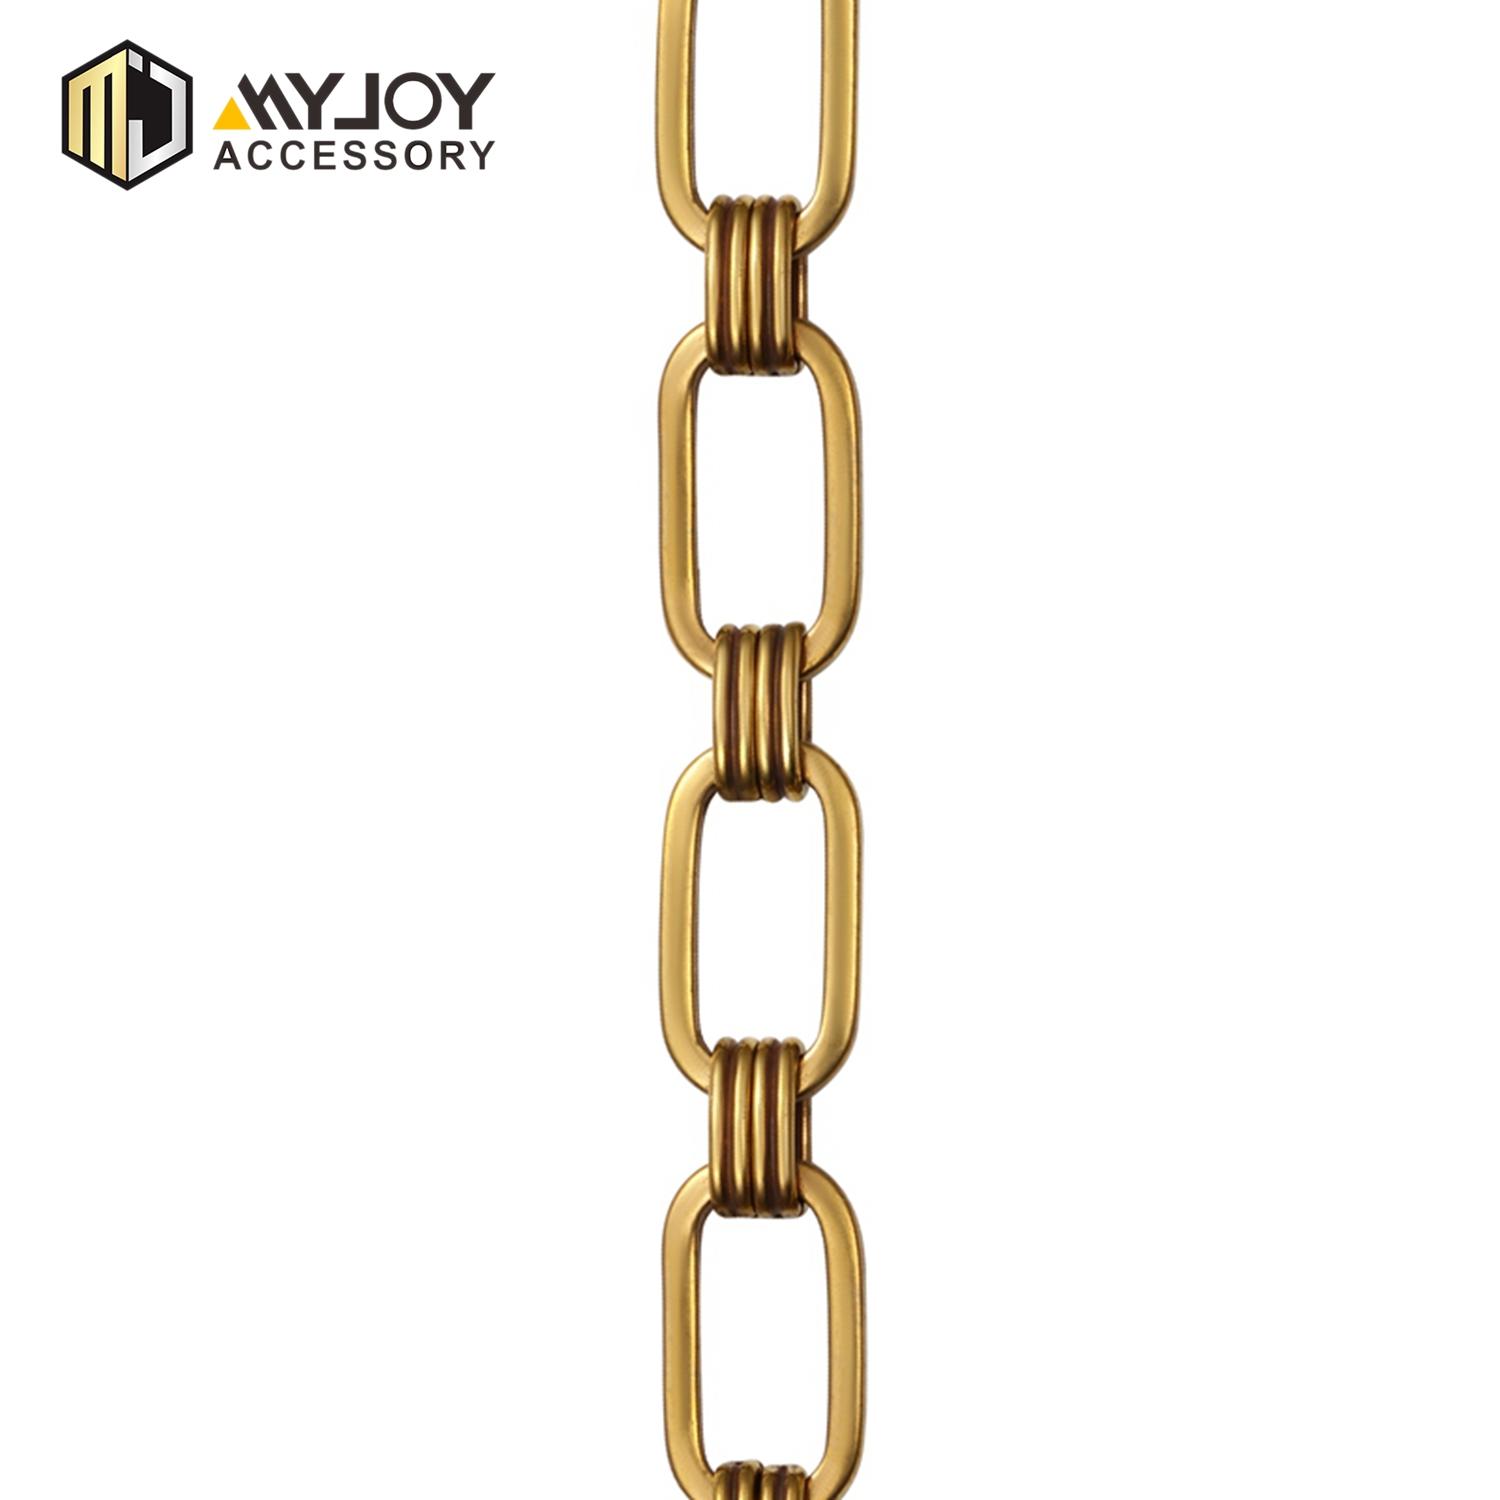 MYJOY color handbag chain strap factory for bags